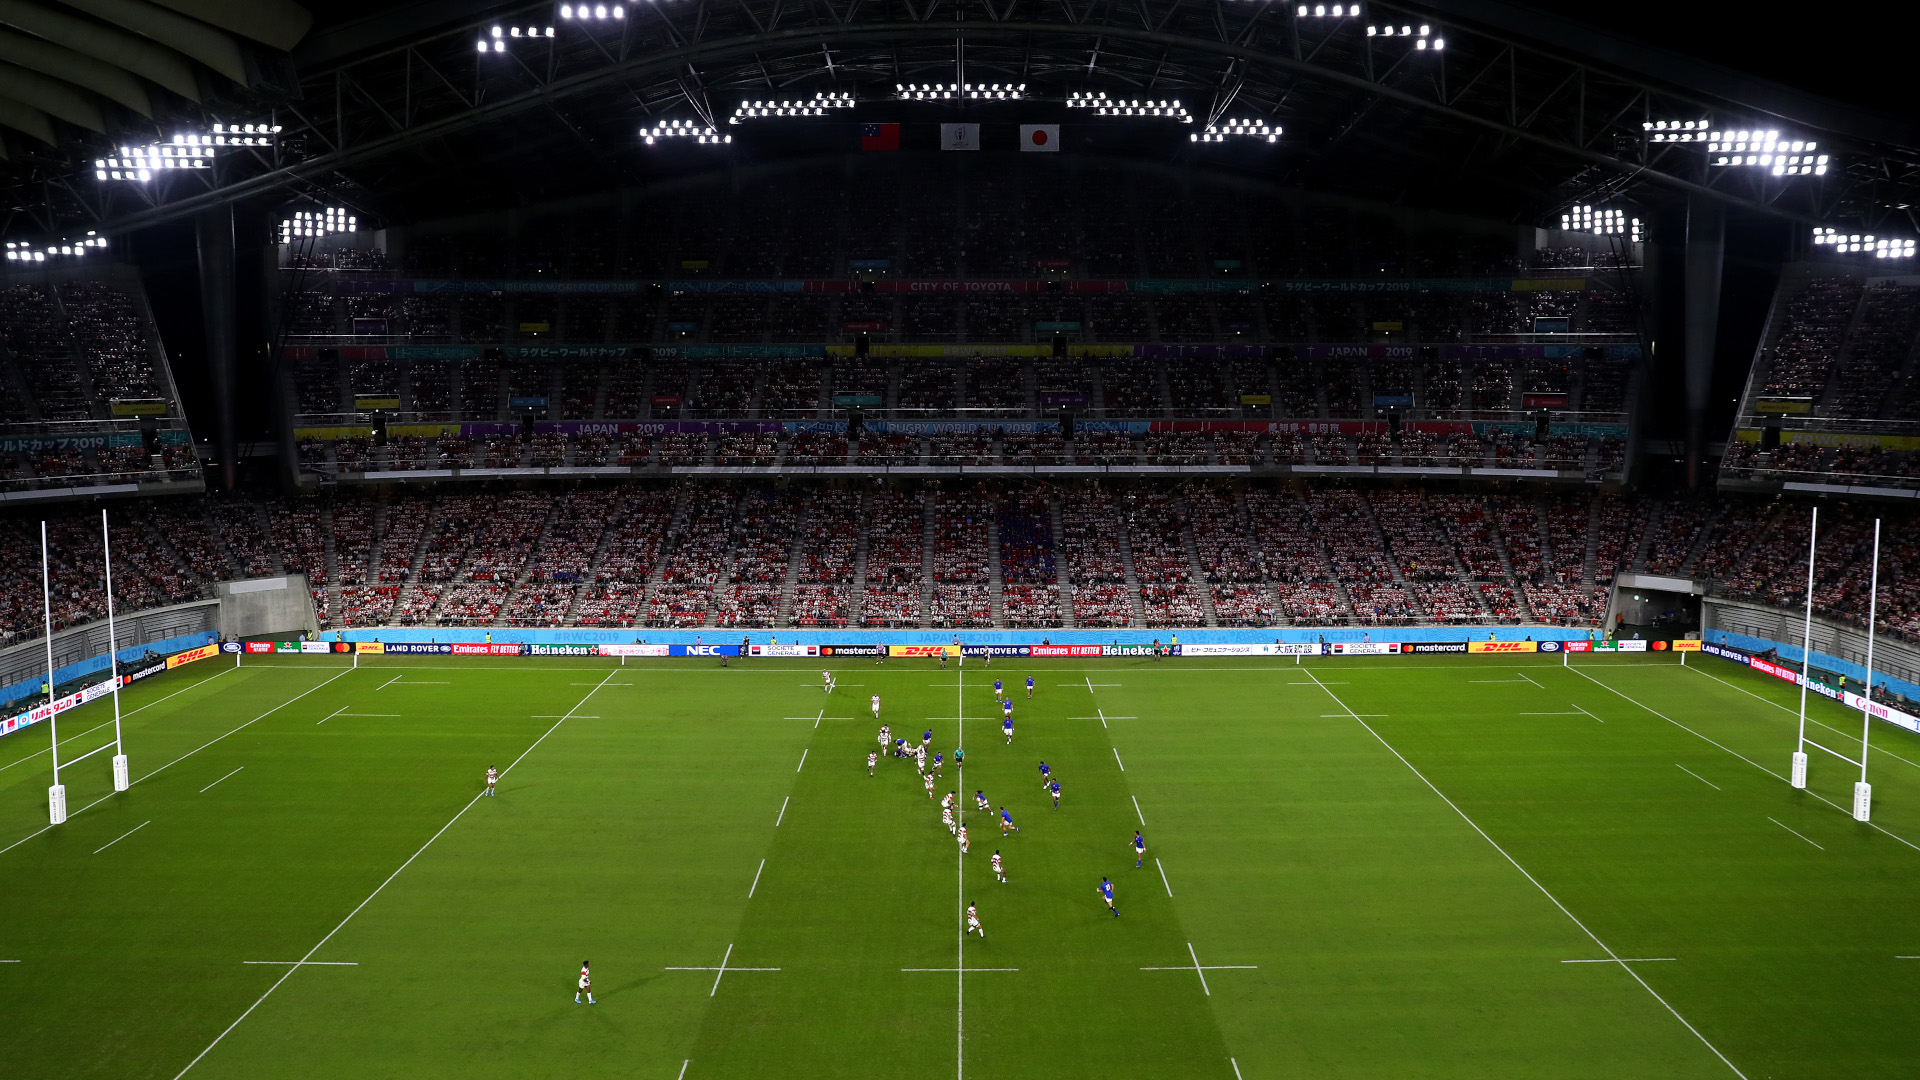 Japan vs France live stream how to watch rugby online from anywhere today TechRadar